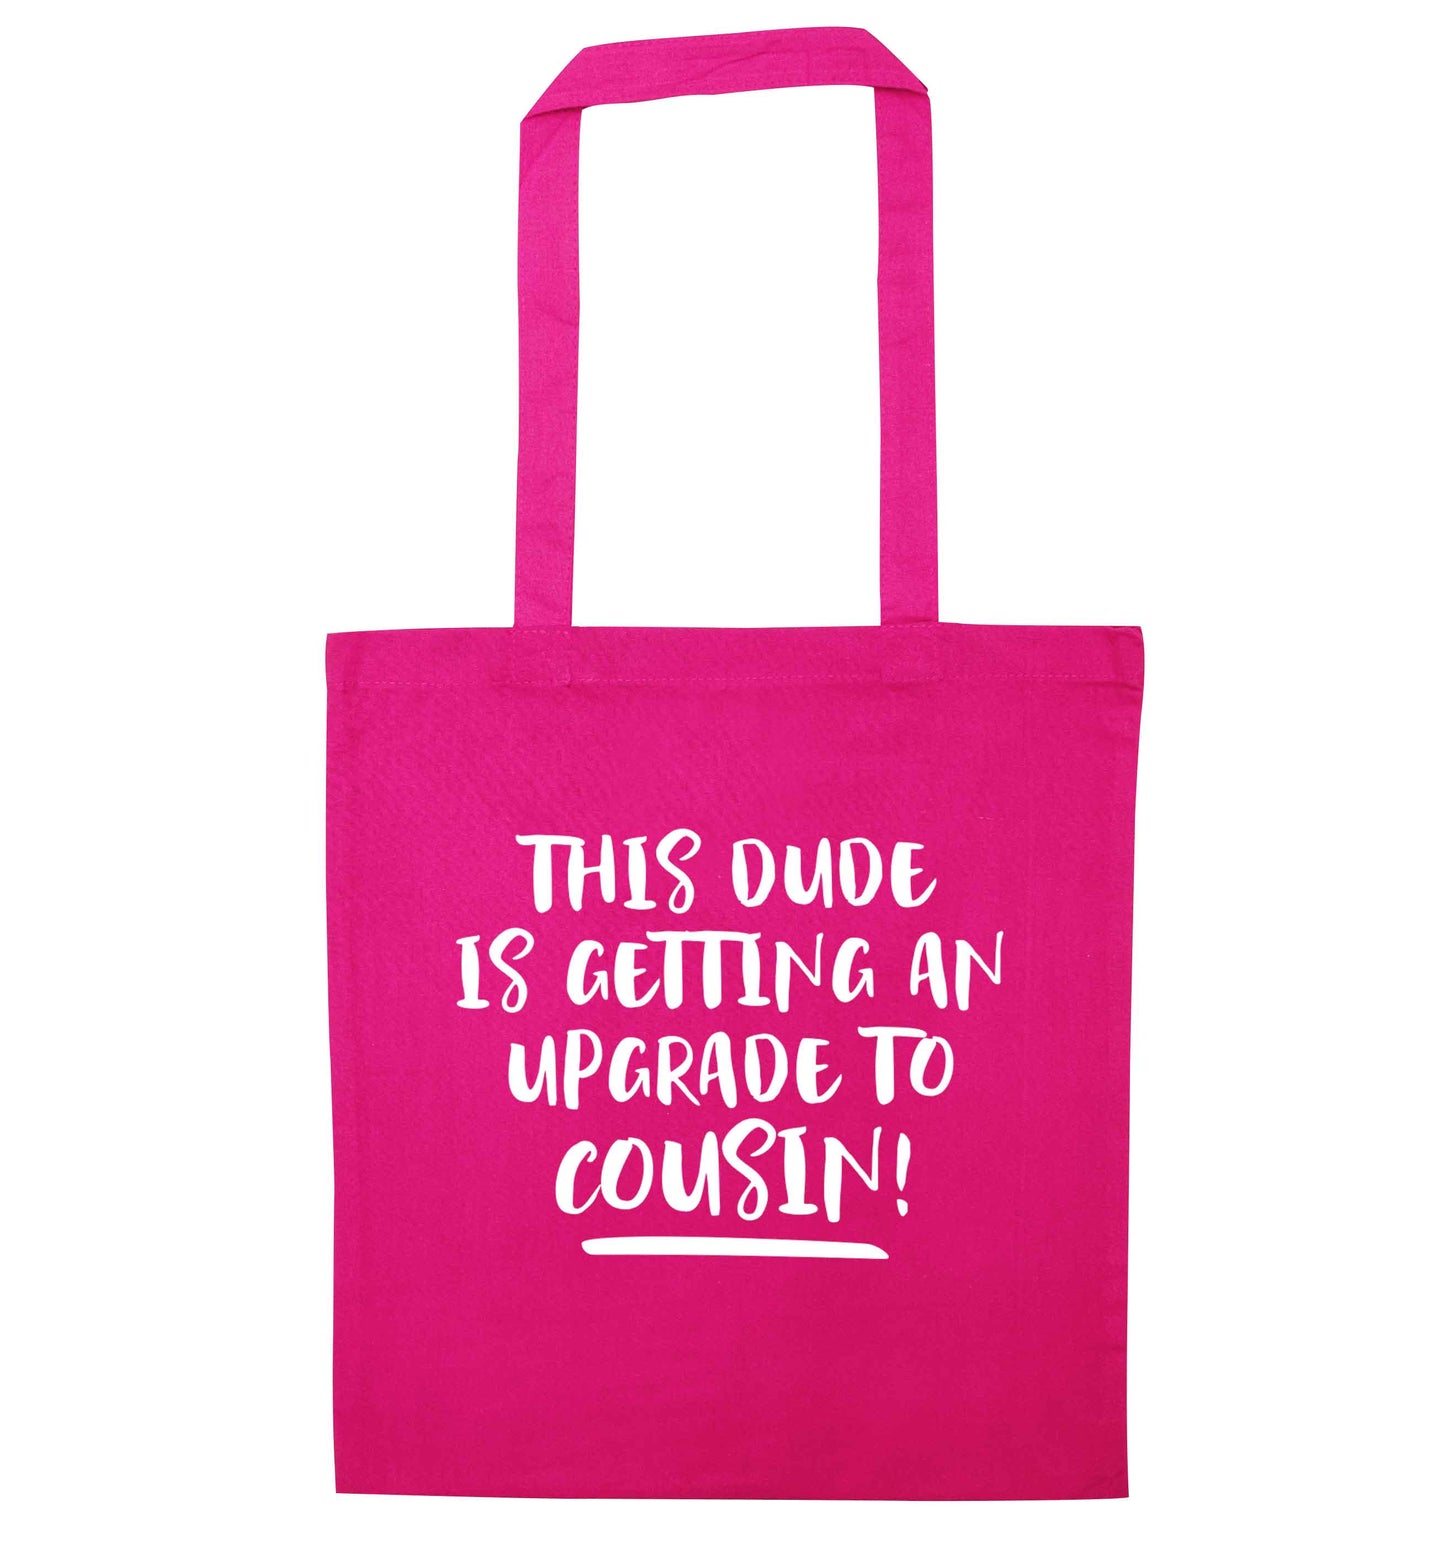 This dude is getting an upgrade to cousin! pink tote bag